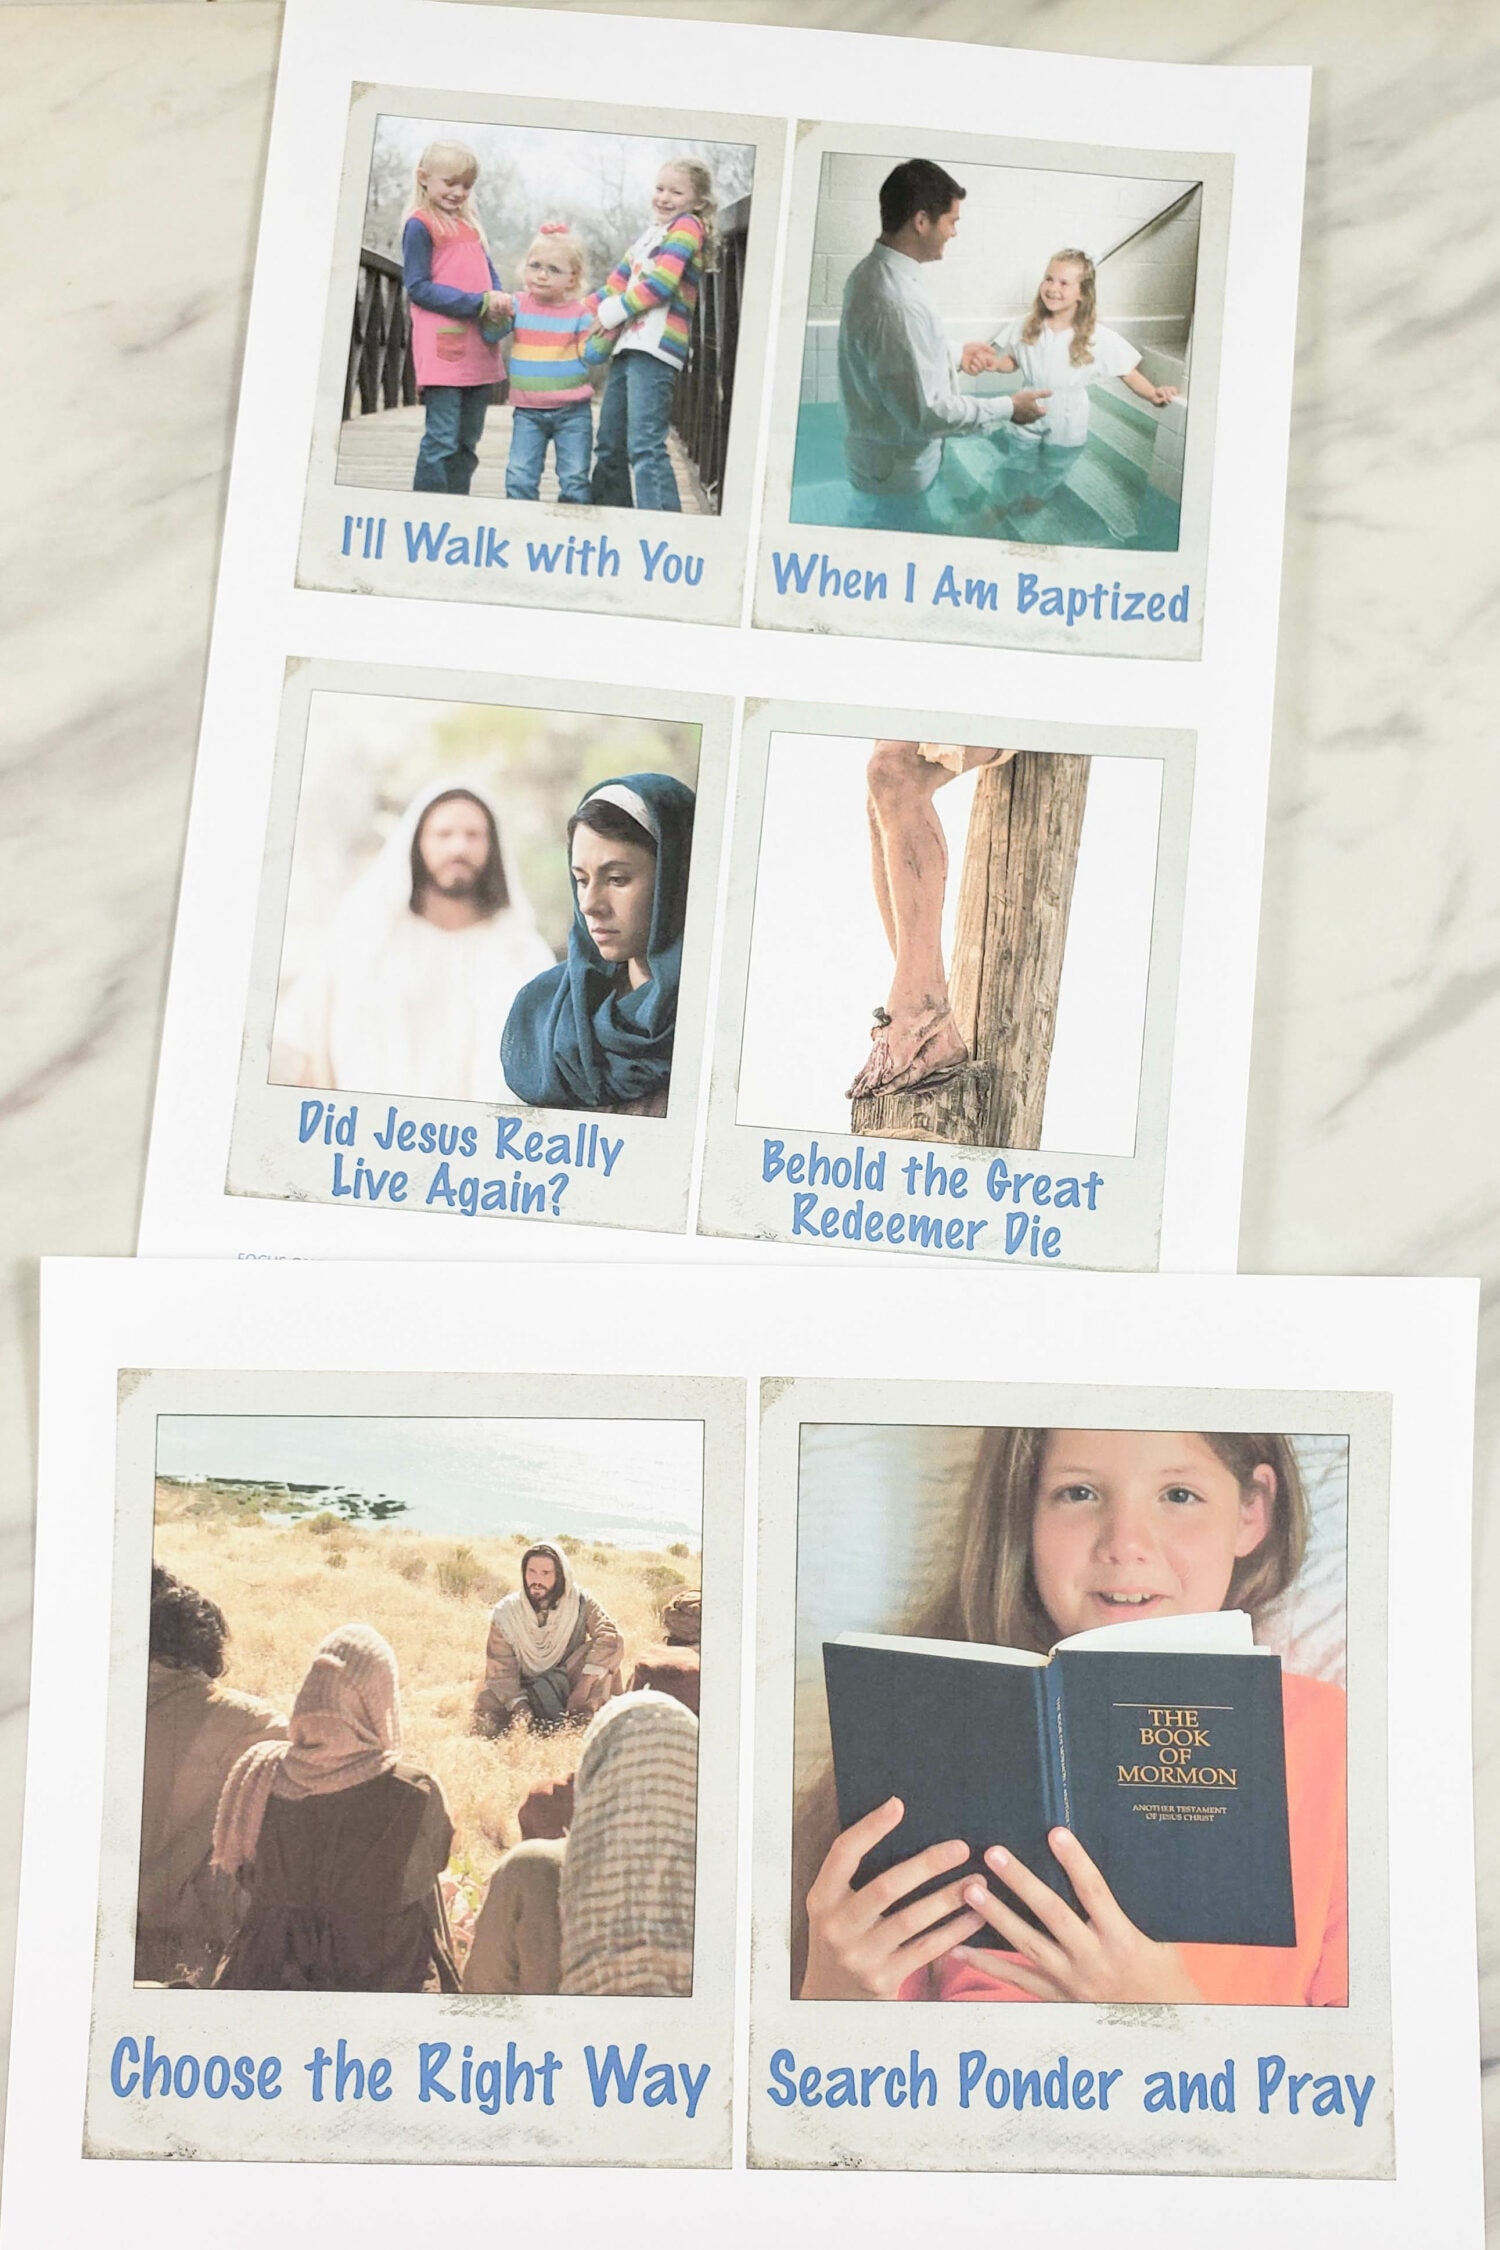 Focus on the Savior New Testament Primary Program Review theme to practice and perfect all of your songs and hymns before the Primary Presentation. With printable song helps for all of the Come Follow Me Primary New Testament songs. For LDS Music Leaders Singing Time.